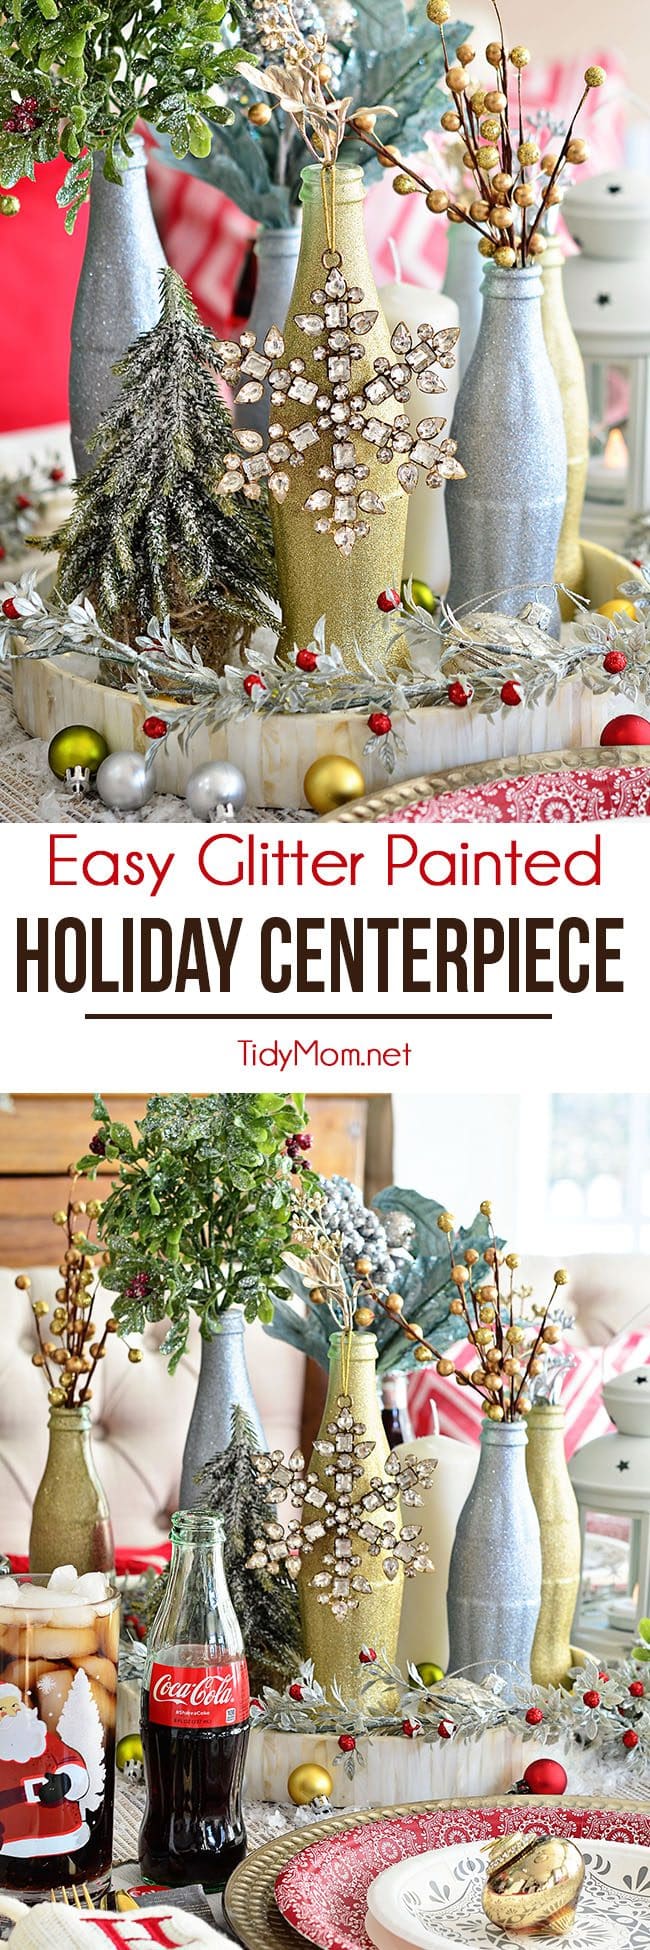 Recycled Coca Cola bottles can look incredibly elegant with a little spray paint. Follow this Glitter Painted Holiday Centerpiece tutorial to glam up your Christmas table, without breaking the bank. details at TidyMom.net